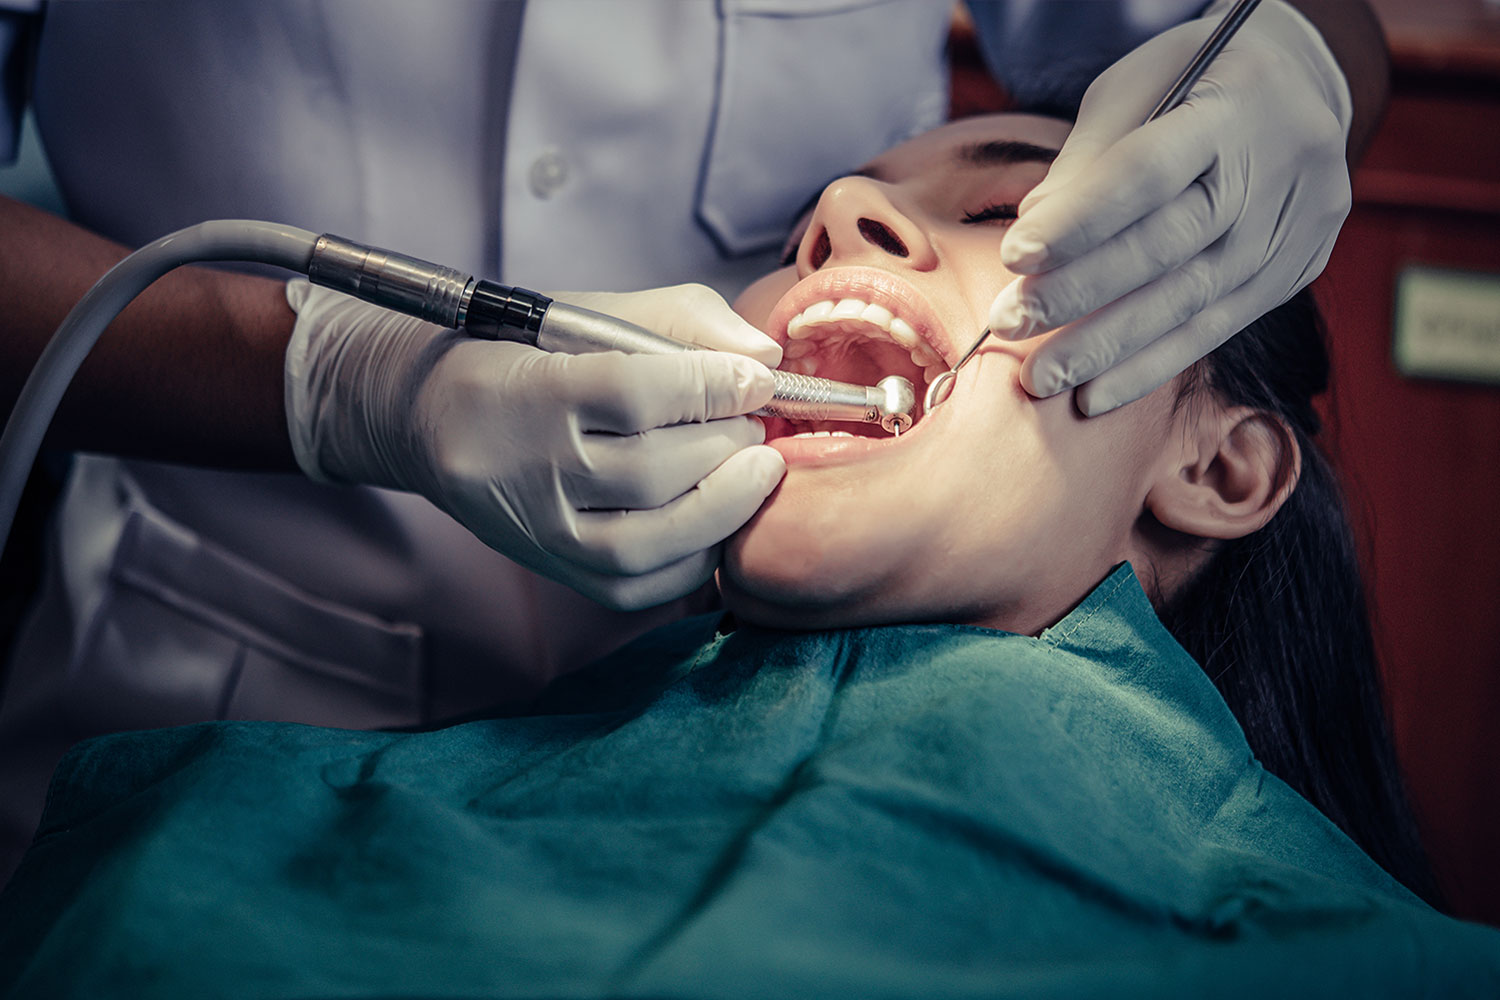 How long is the removal procedure and healing process take for wisdom teeth removal?